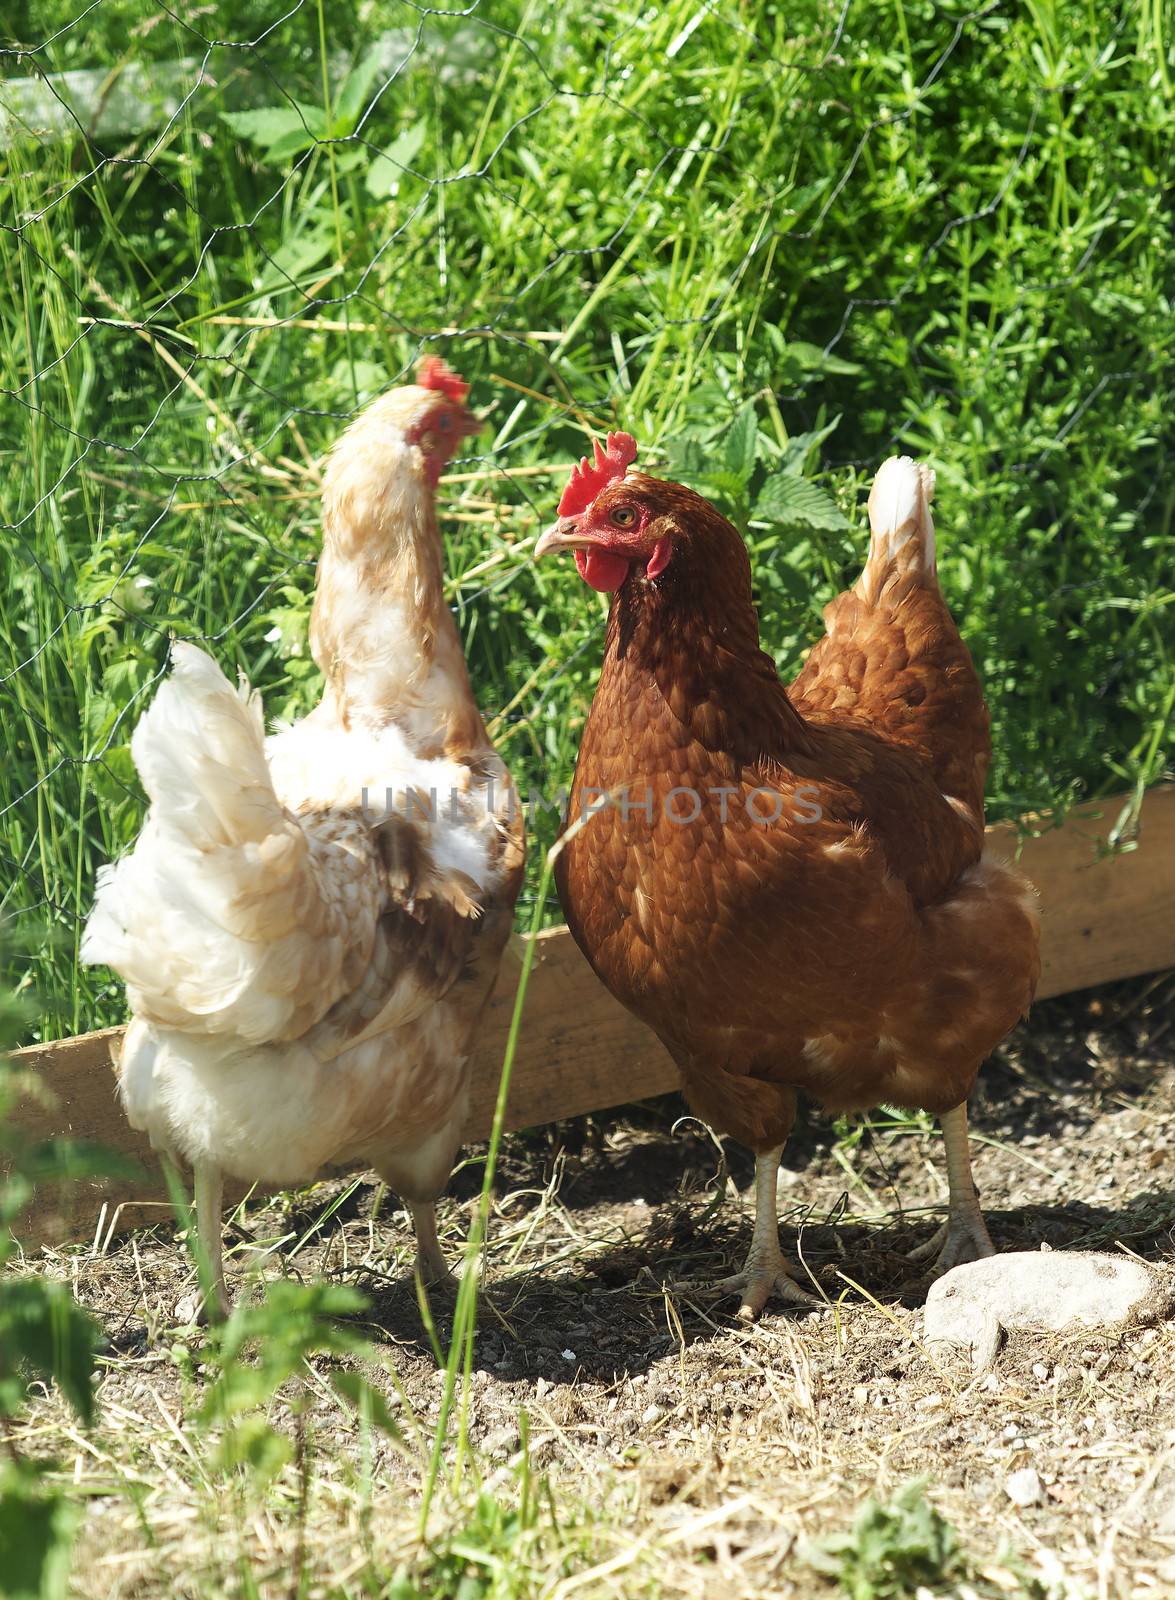 Poultry in a farm environment